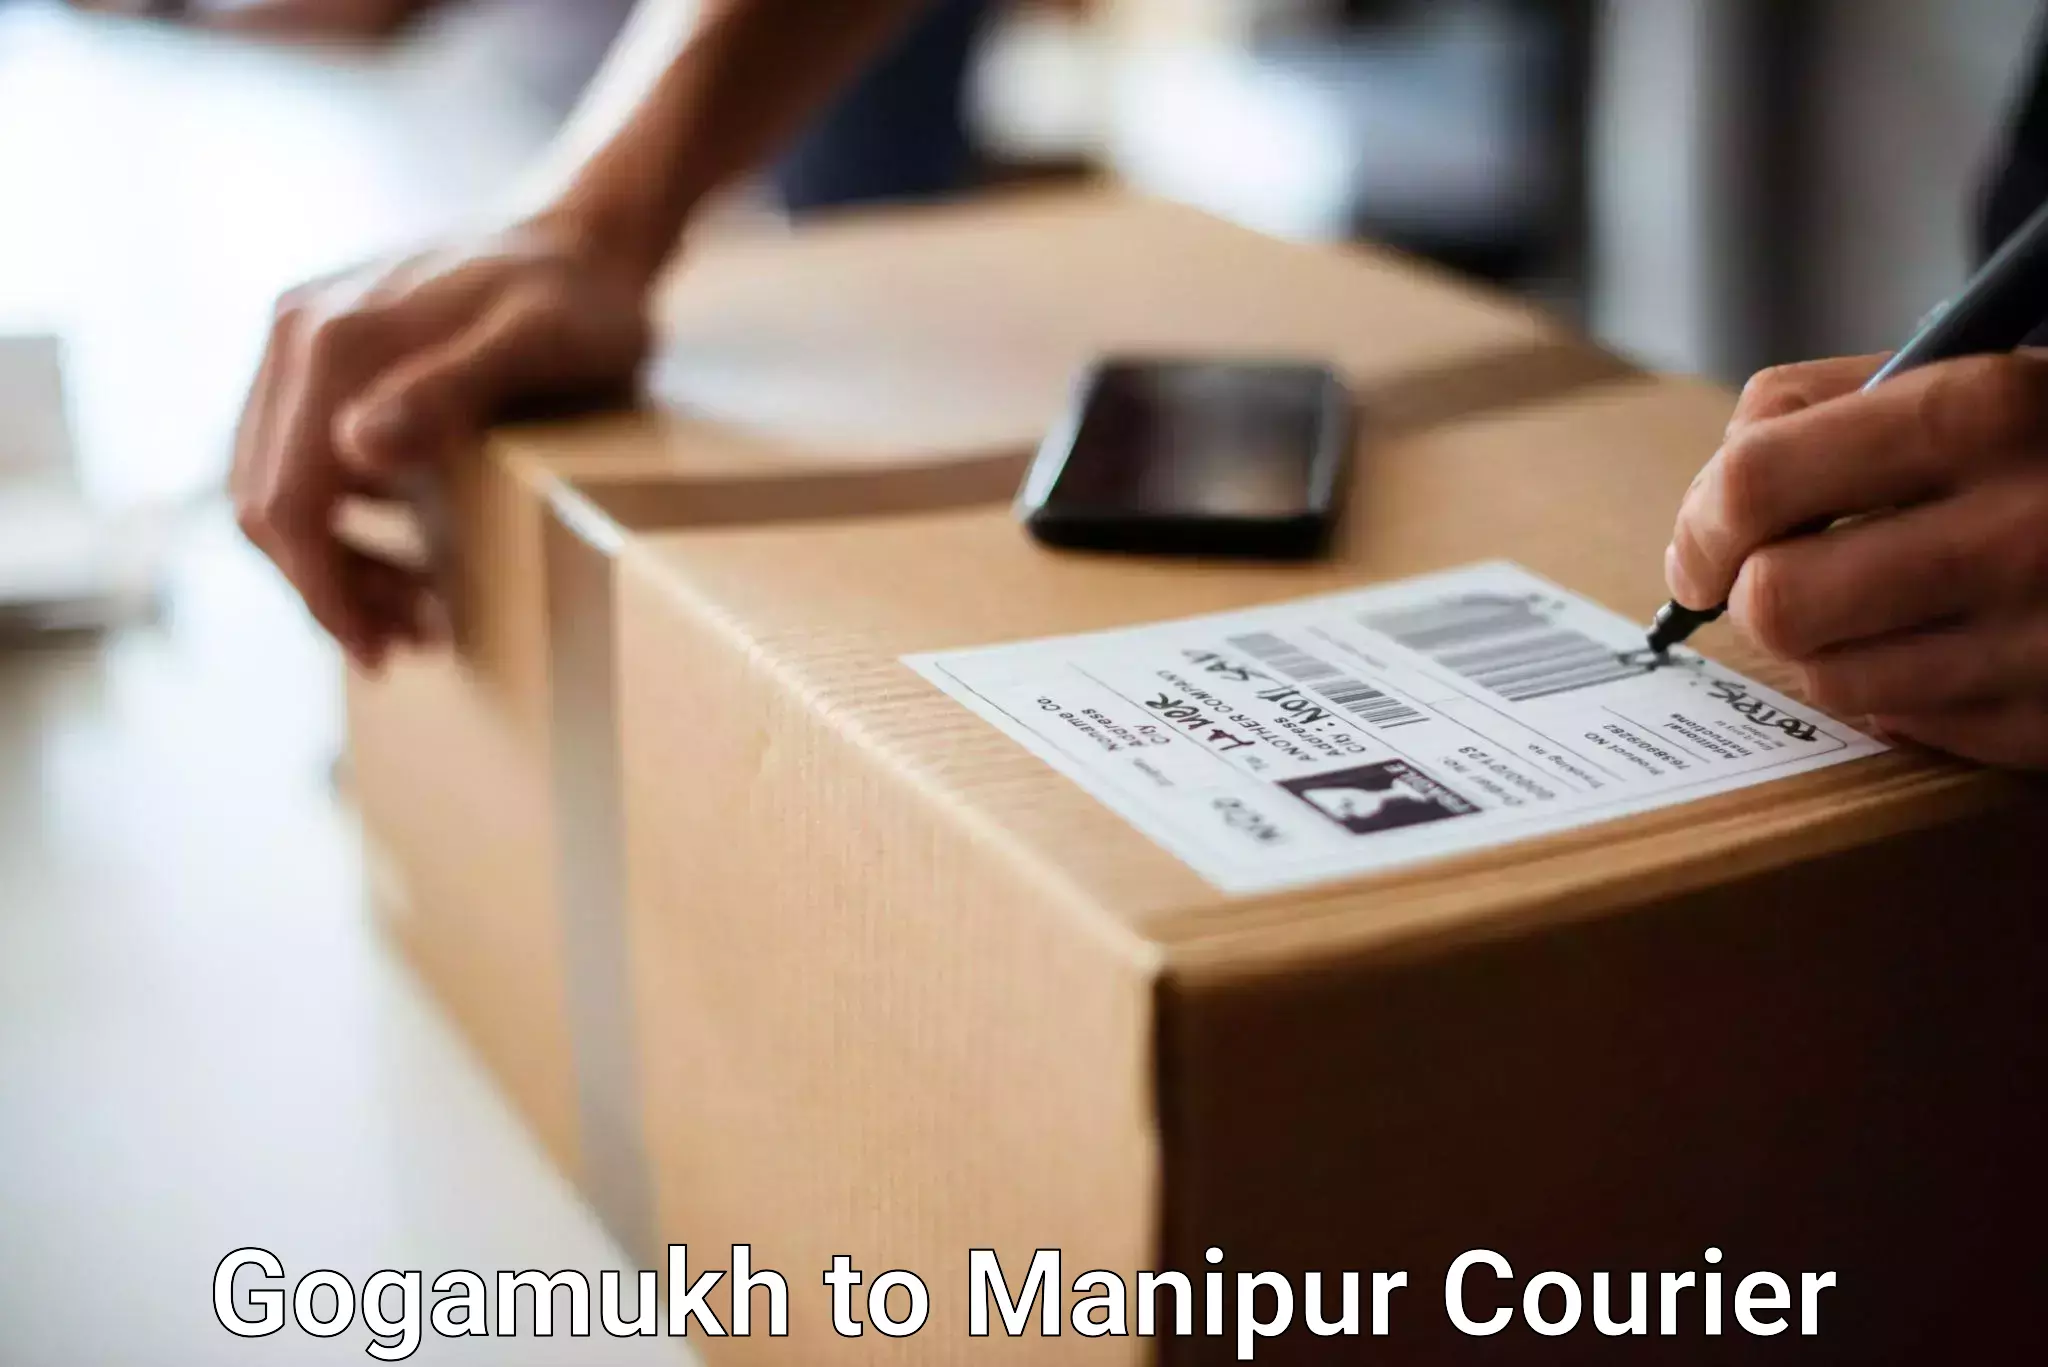 Baggage delivery technology Gogamukh to Manipur